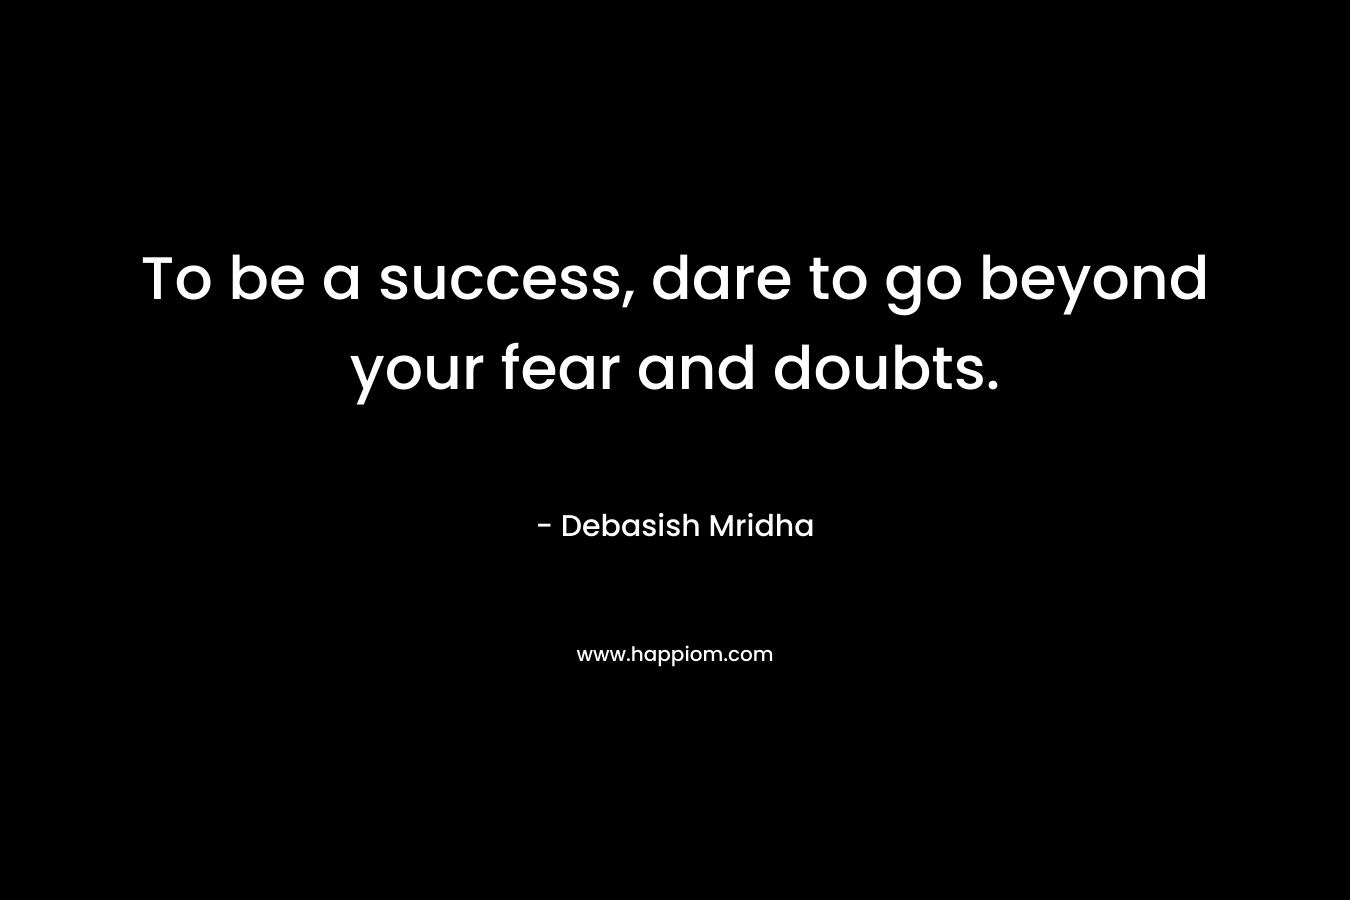 To be a success, dare to go beyond your fear and doubts. – Debasish Mridha